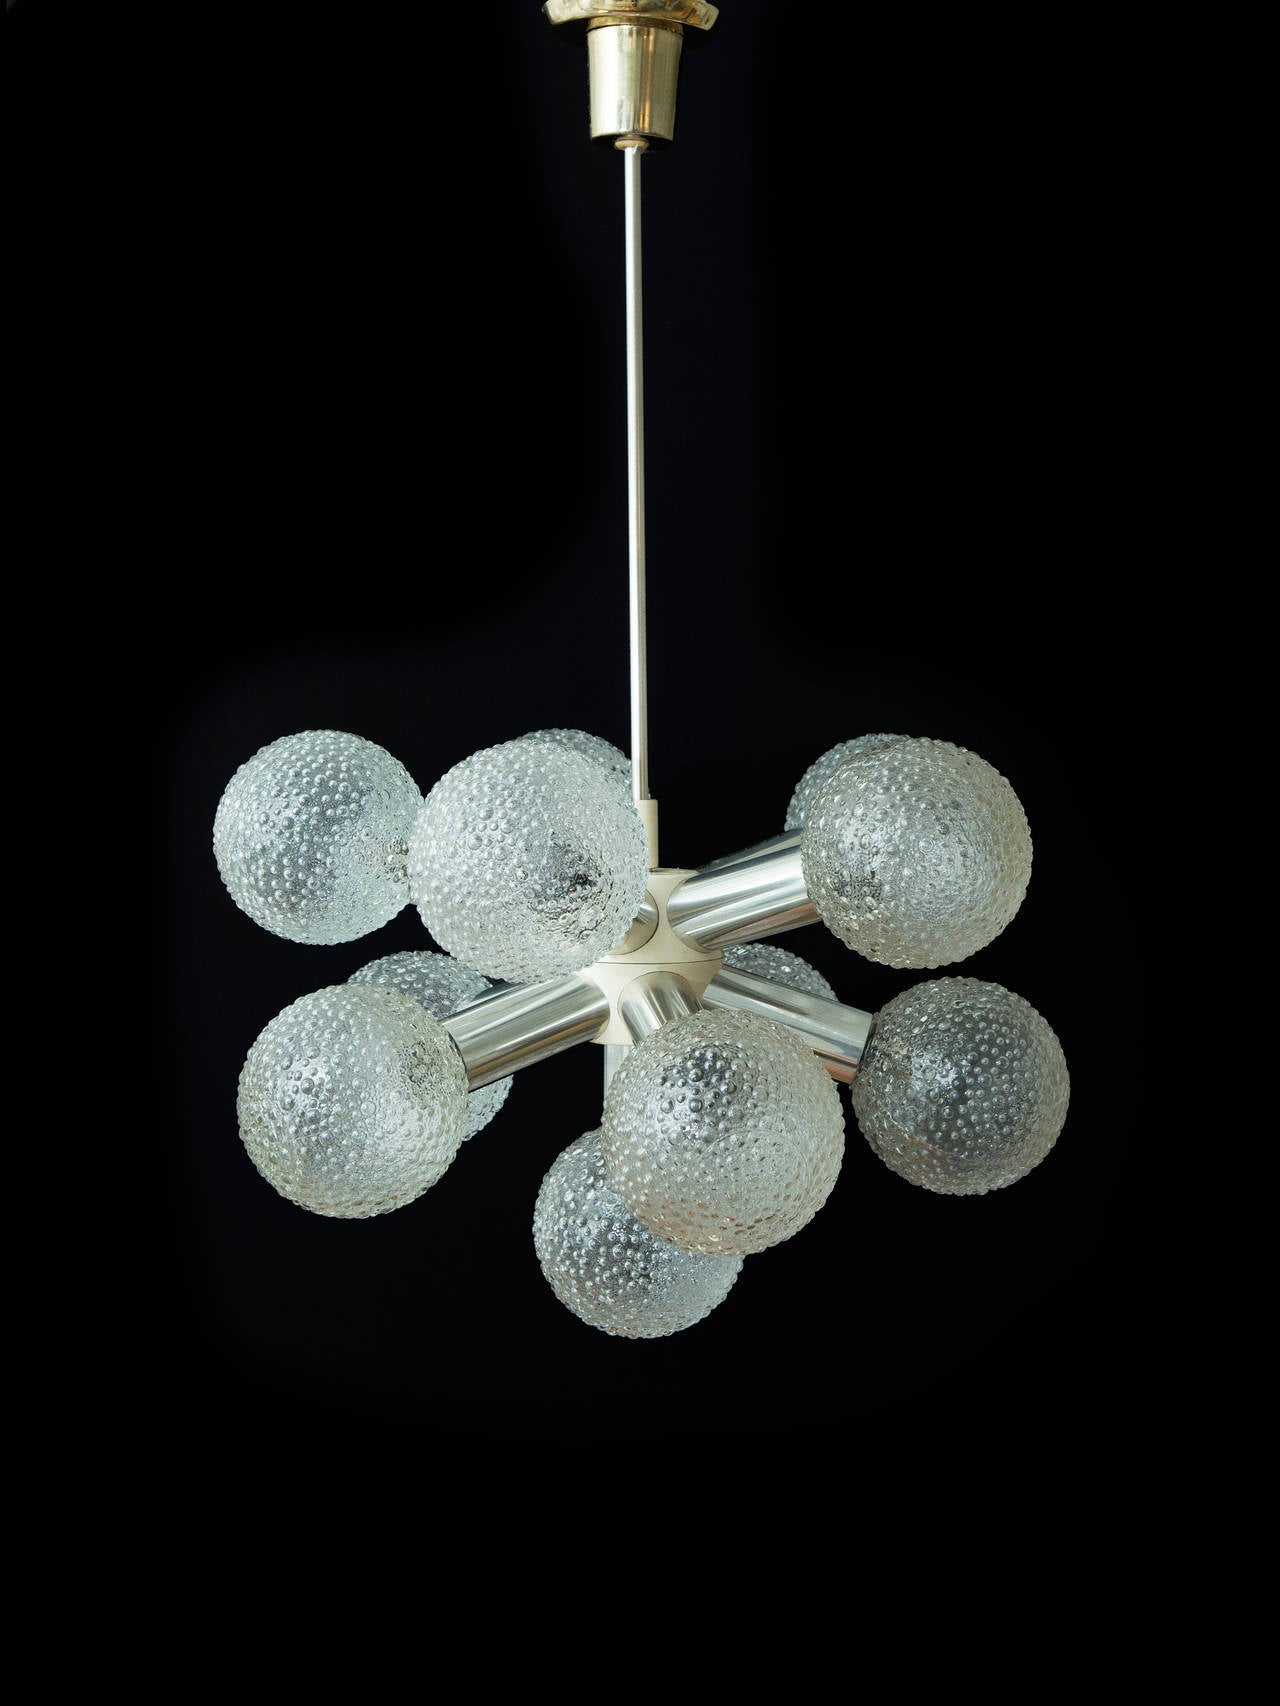 Pair of stunning chrome mod chandeliers from Germany. Textured globes add to the beauty (2 available).